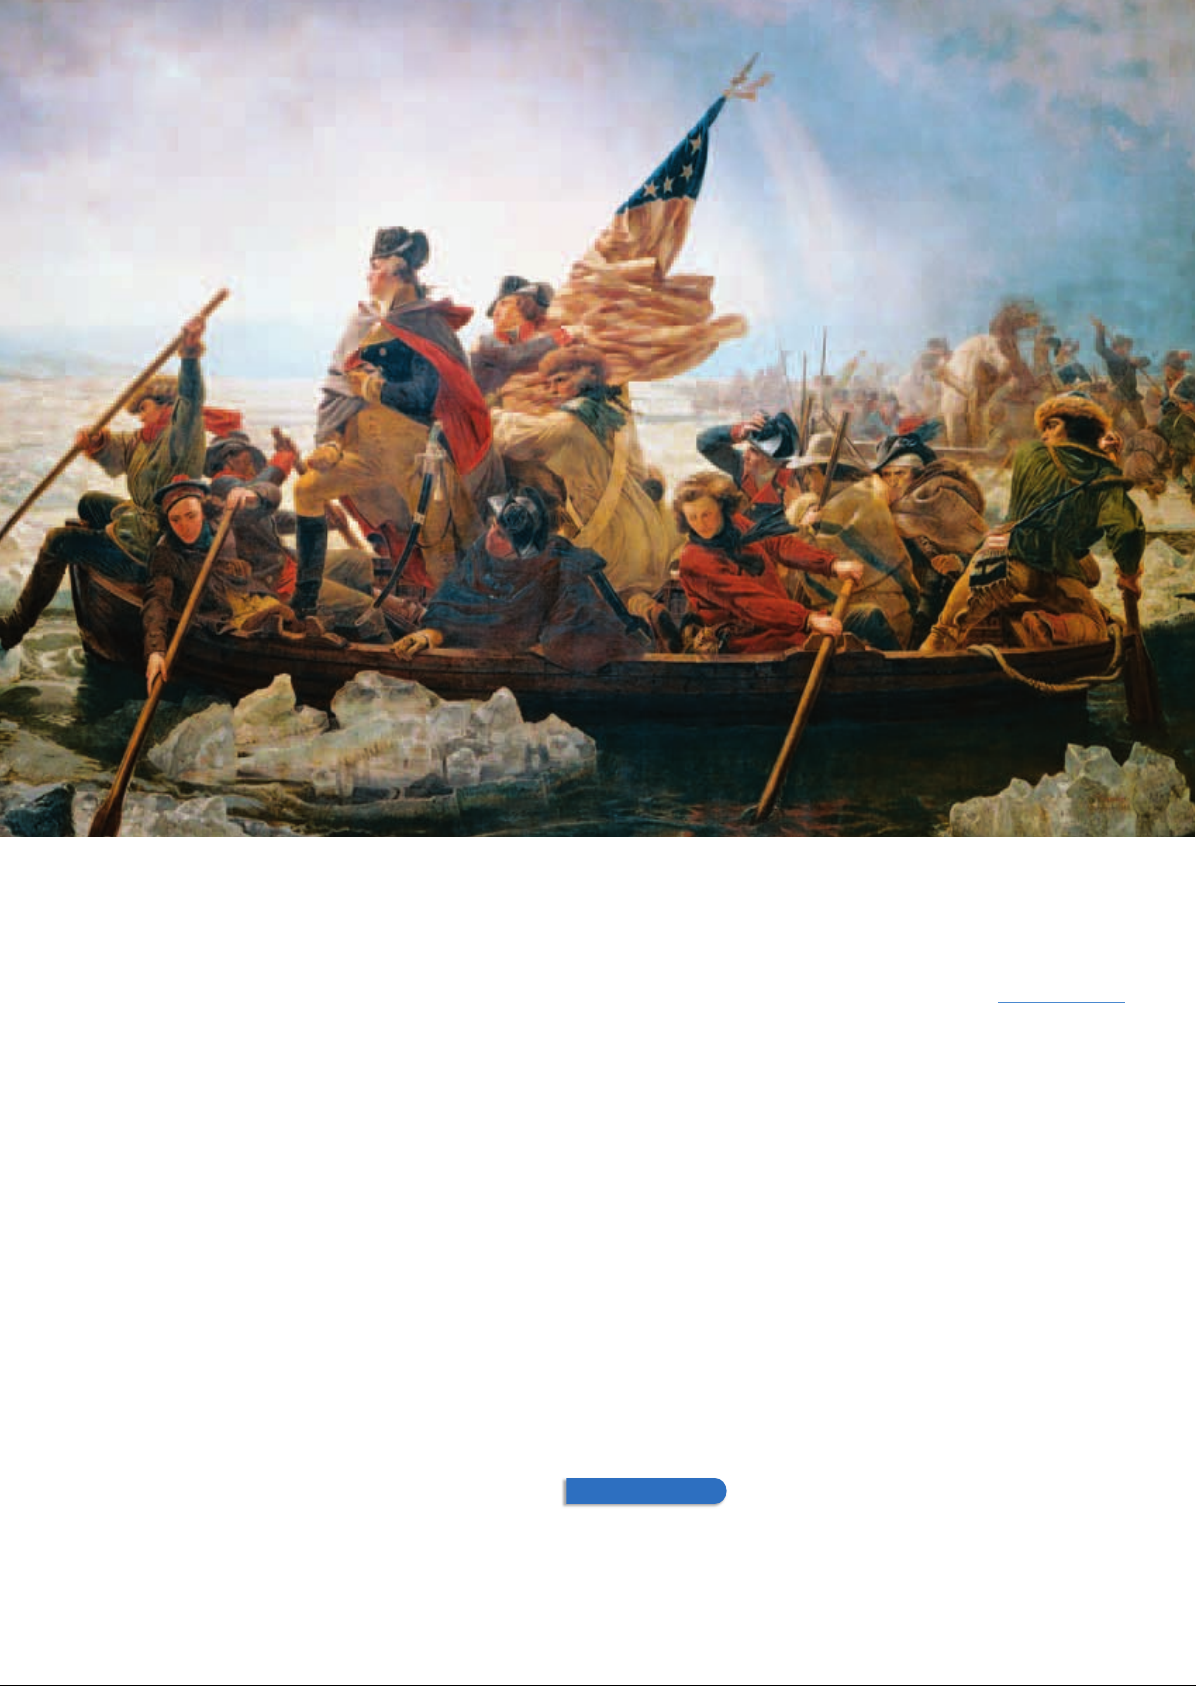 US_History_Textbook_8th_Grade_Chapter_3_The_American_Revolution Image-17